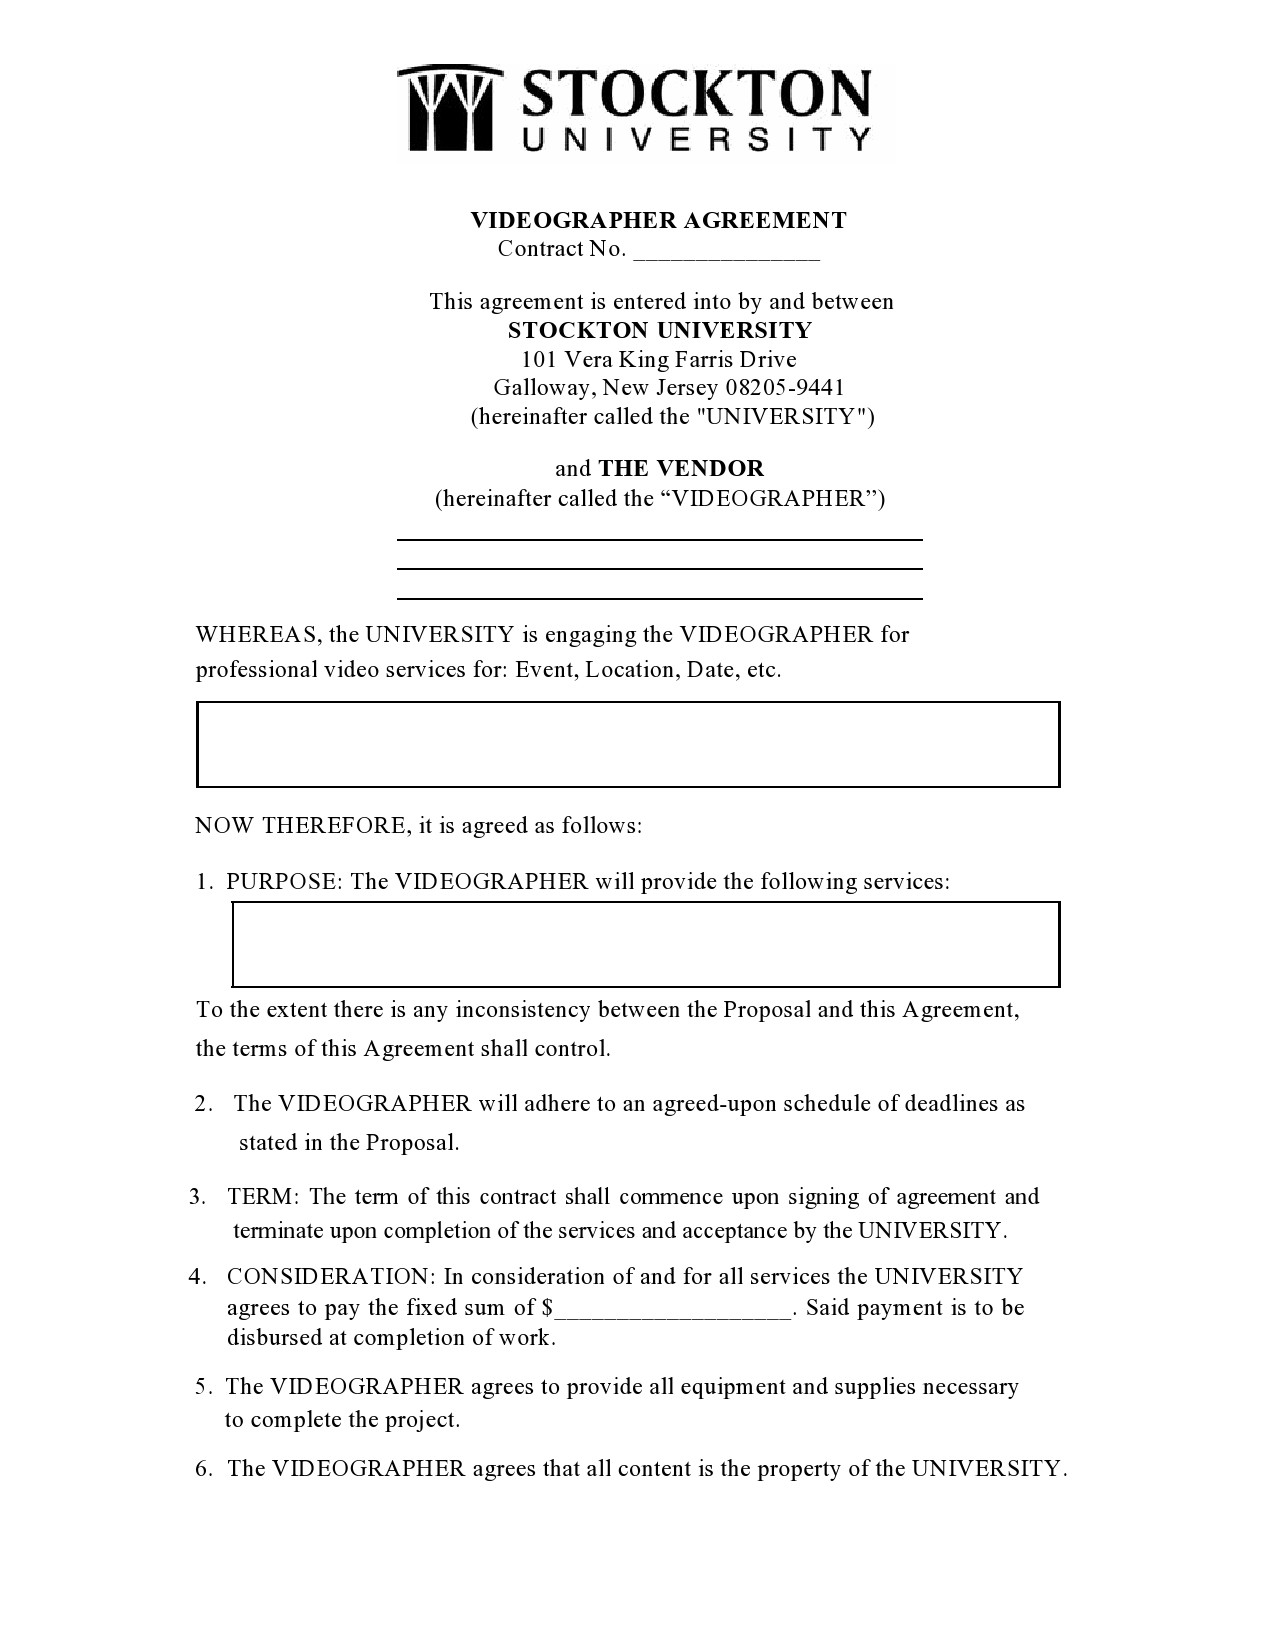 39 Simple Videography Contract Templates (FREE) ᐅ TemplateLab